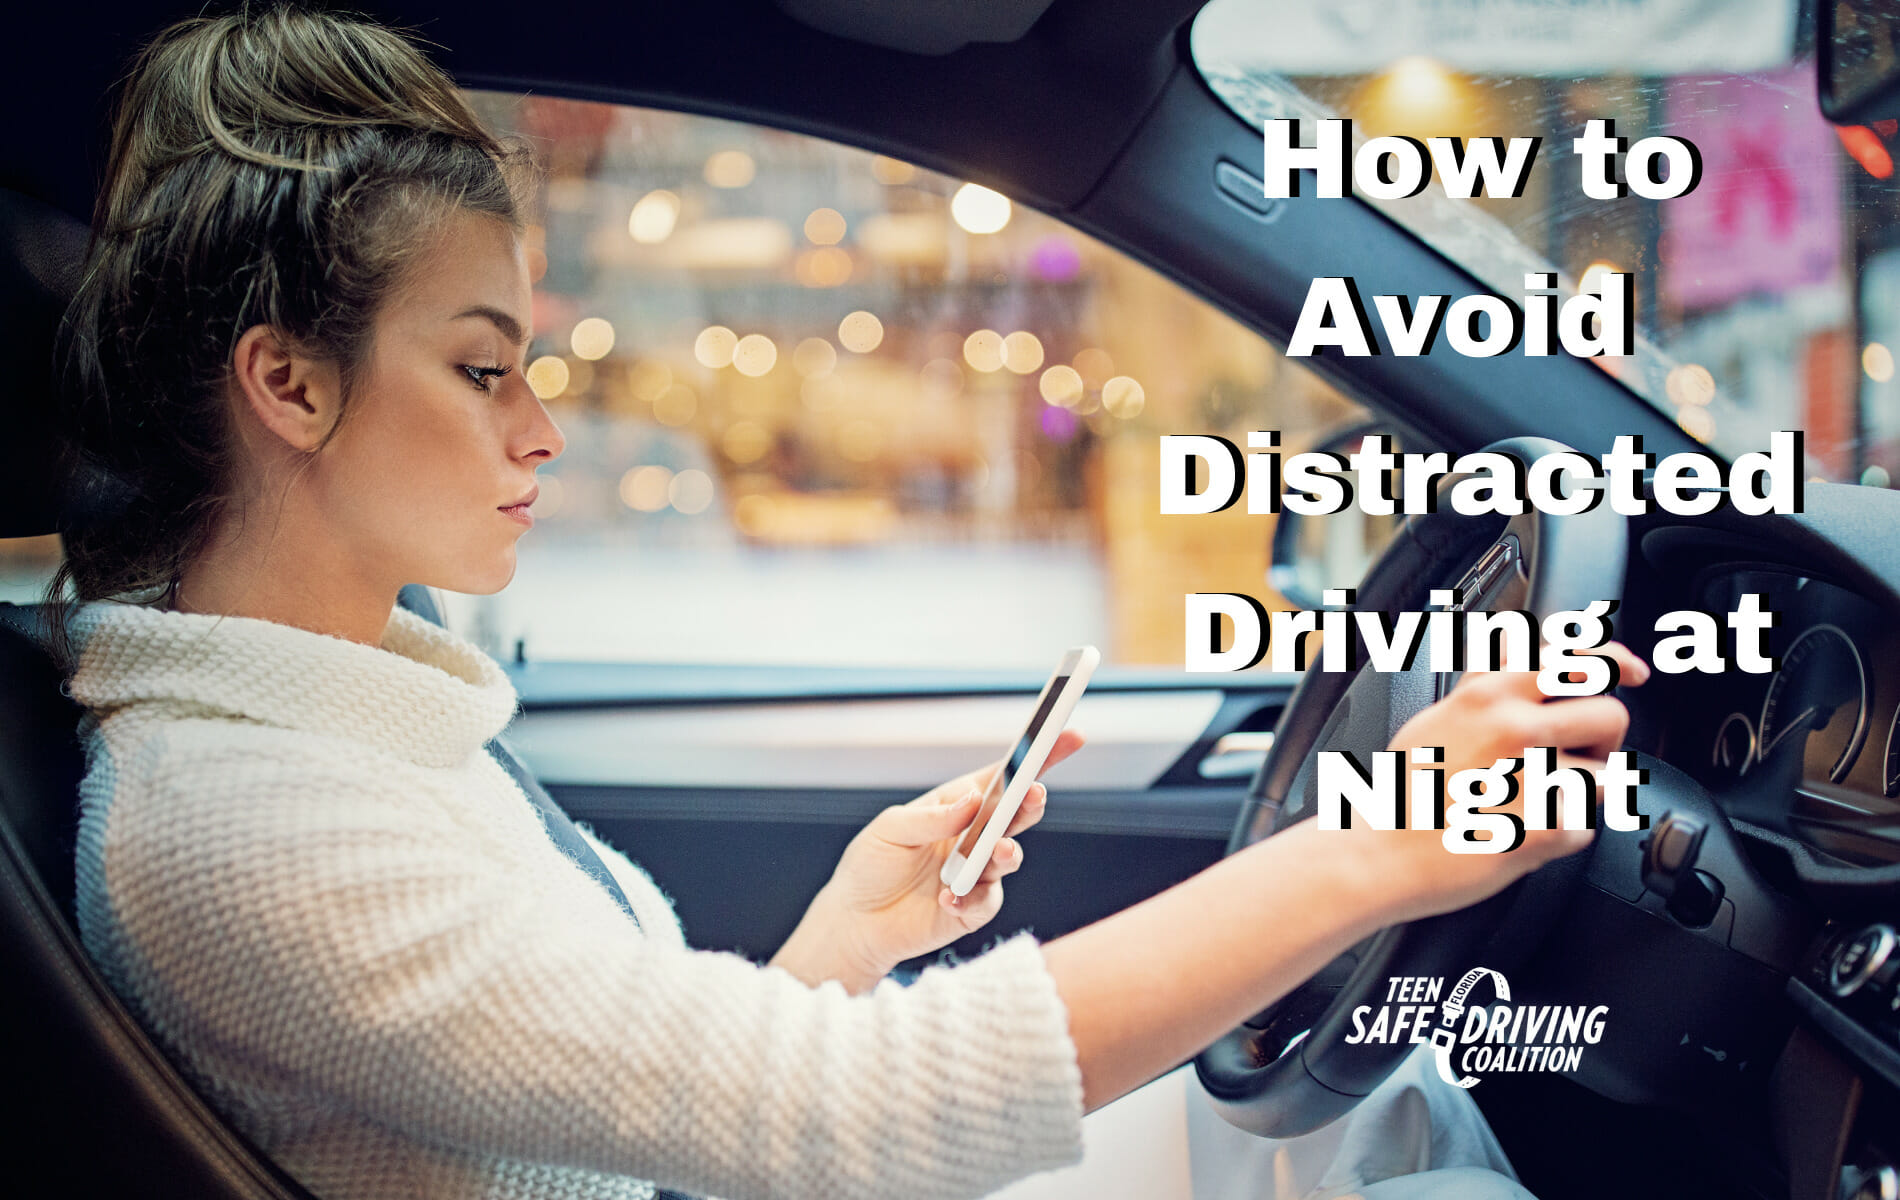 How to Avoid Distracted Driving at Night